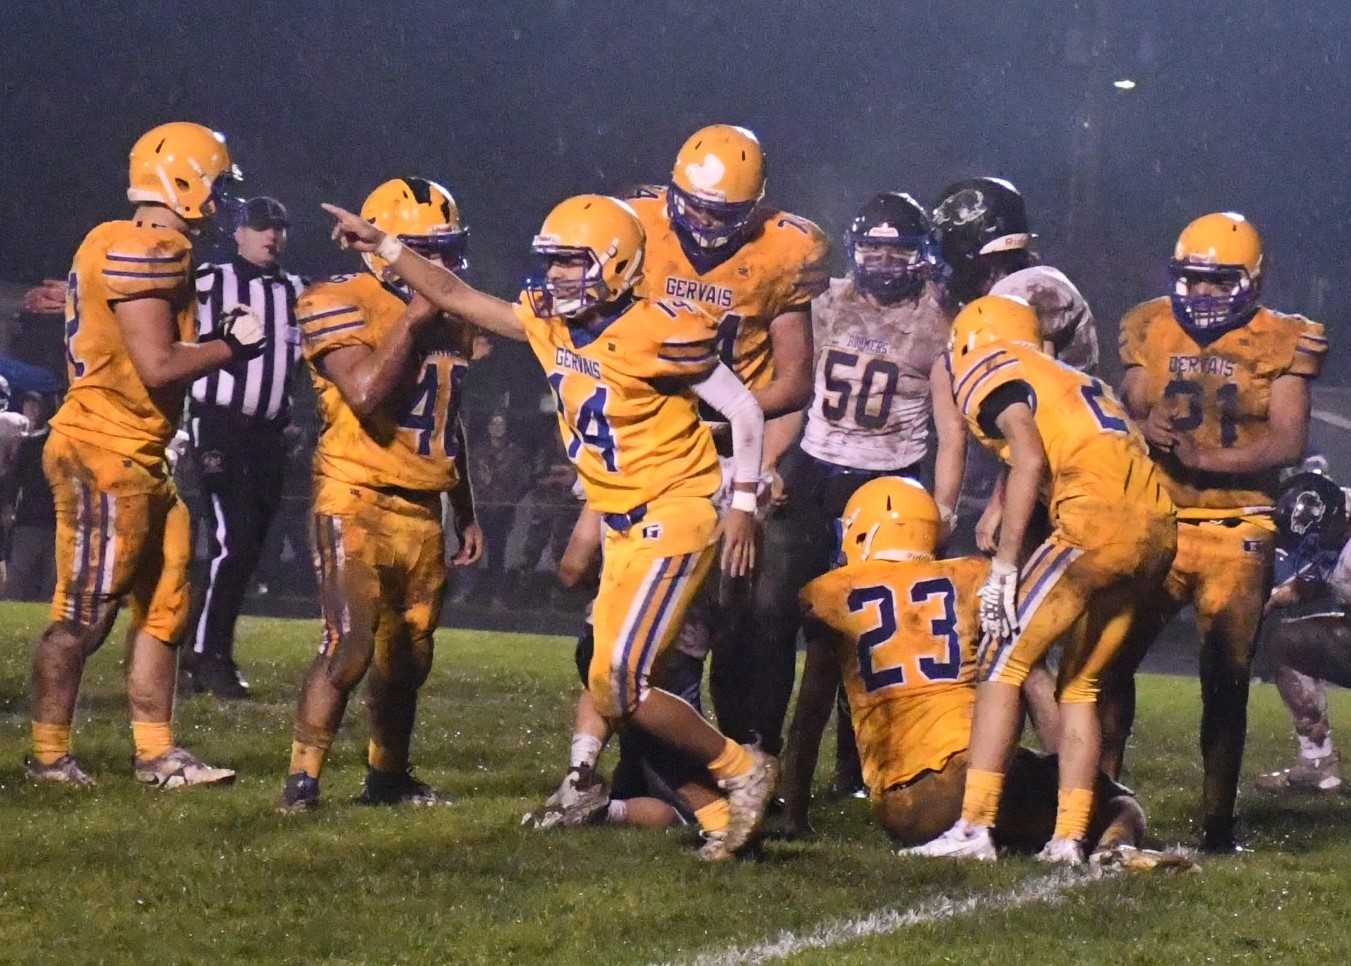 Gervais players celebrate forcing a turnover in their 24-12 first-round playoff win over Toledo. (Photo by Jeremy McDonald)